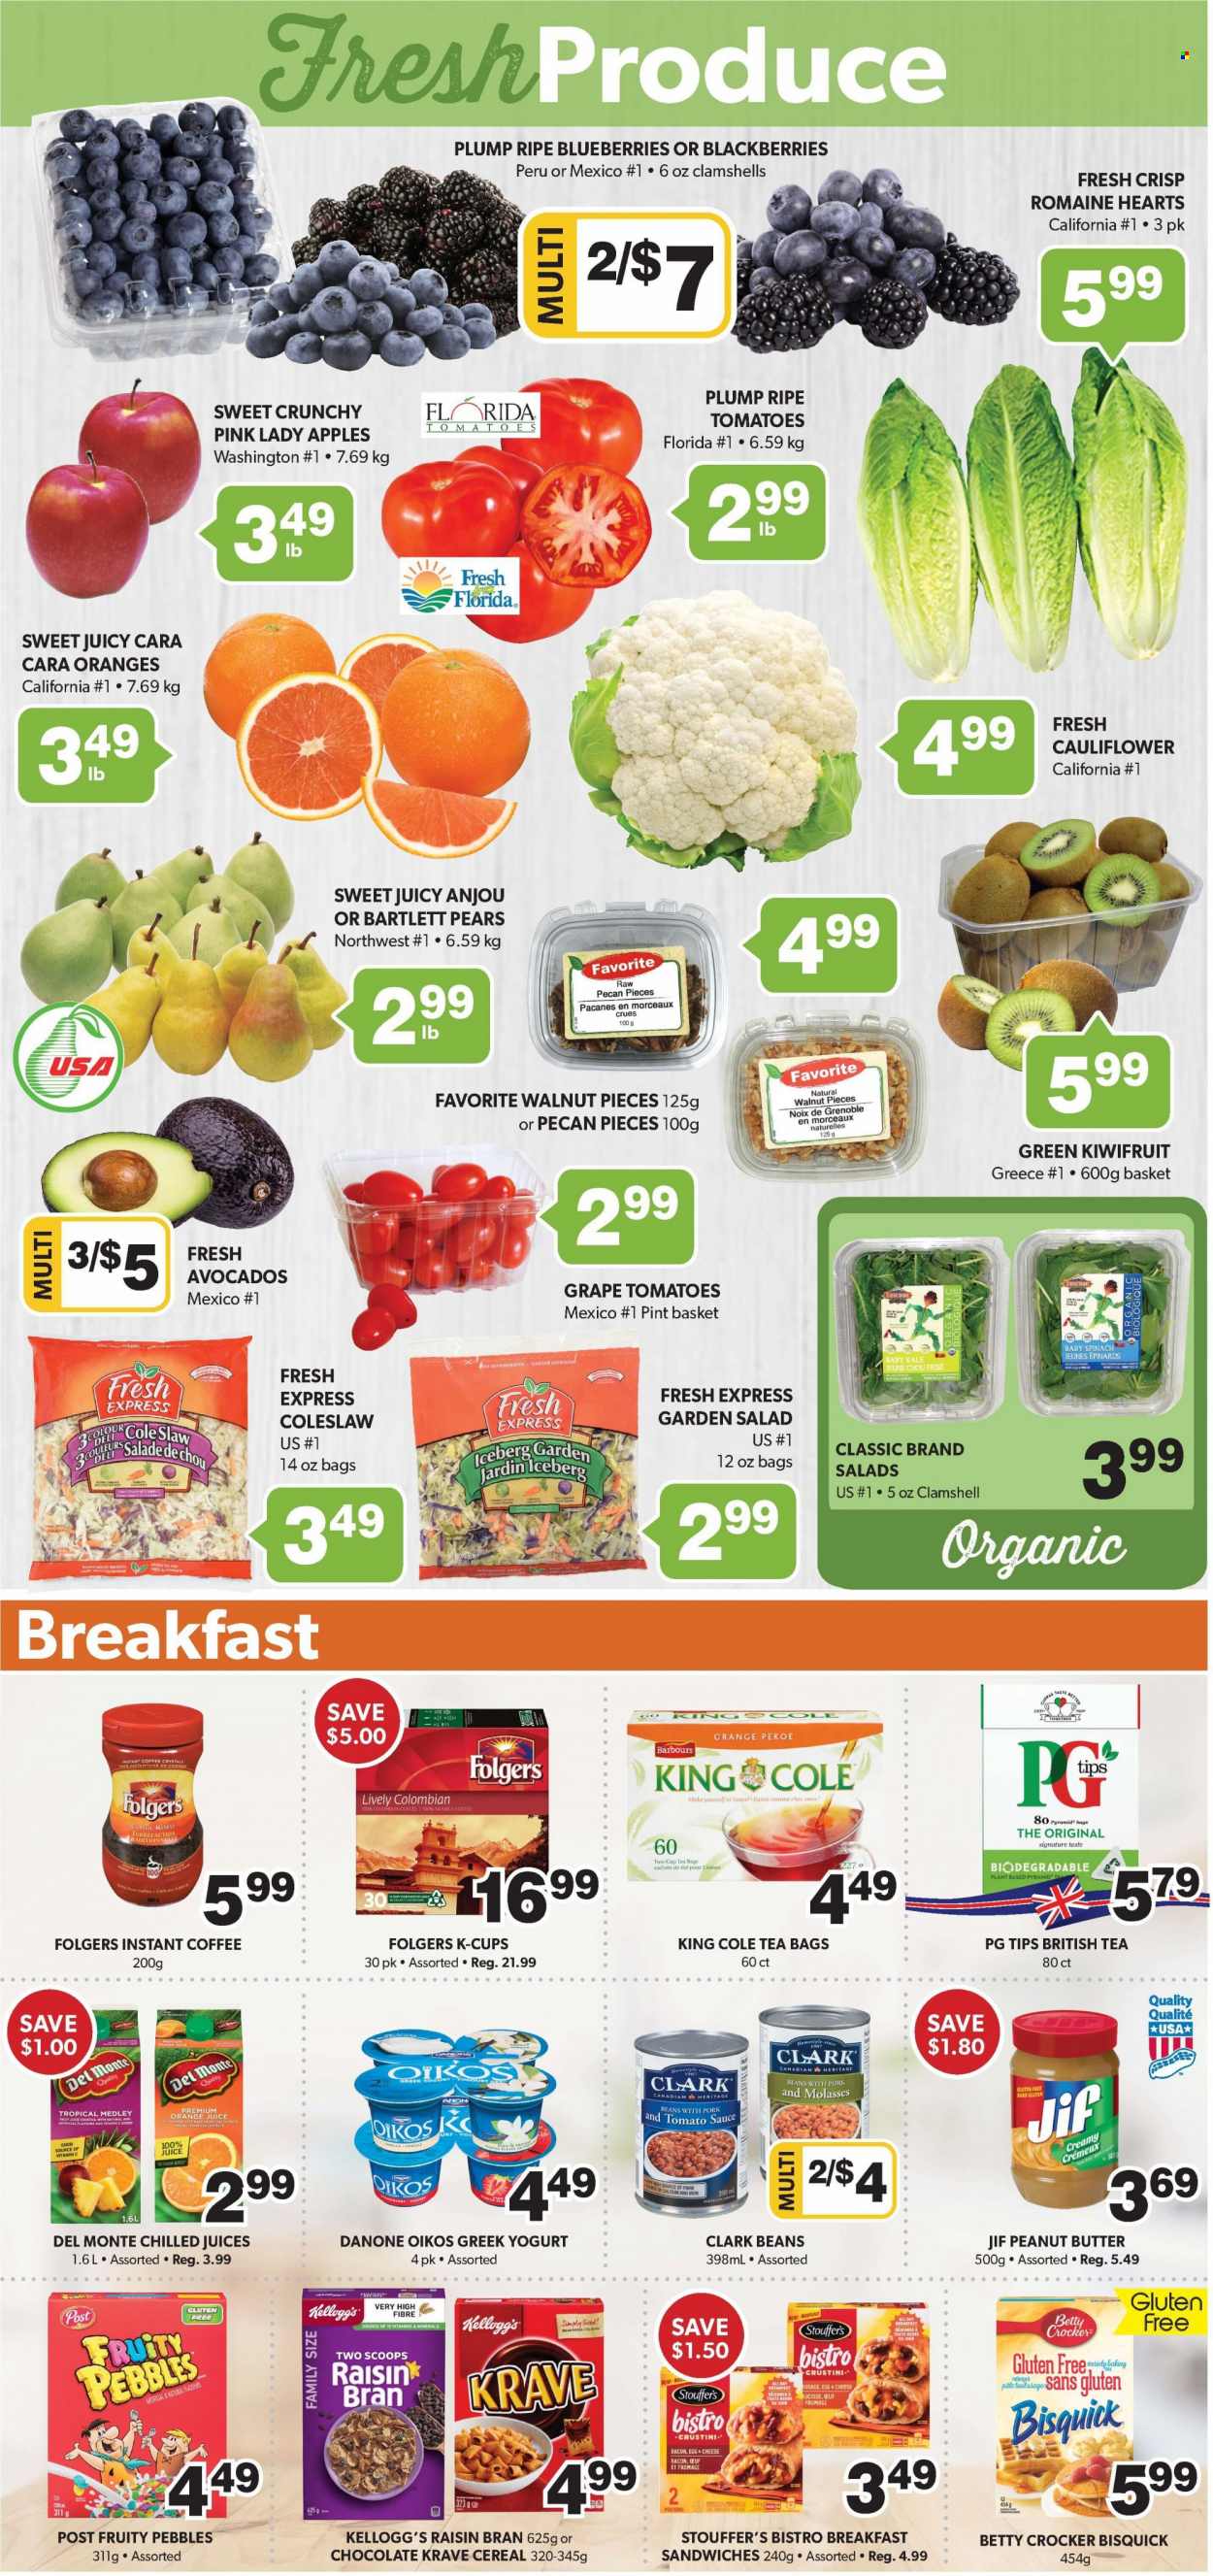 thumbnail - Colemans Flyer - January 26, 2023 - February 01, 2023 - Sales products - cauliflower, tomatoes, apples, avocado, Bartlett pears, blackberries, blueberries, pears, oranges, Pink Lady, coleslaw, sauce, greek yoghurt, yoghurt, Oikos, Stouffer's, chocolate, Kellogg's, Bisquick, tomato sauce, Del Monte, cereals, Fruity Pebbles, Raisin Bran, molasses, peanut butter, Jif, walnuts, juice, tea bags, coffee, instant coffee, Folgers, coffee capsules, K-Cups, kiwi, Danone. Page 2.